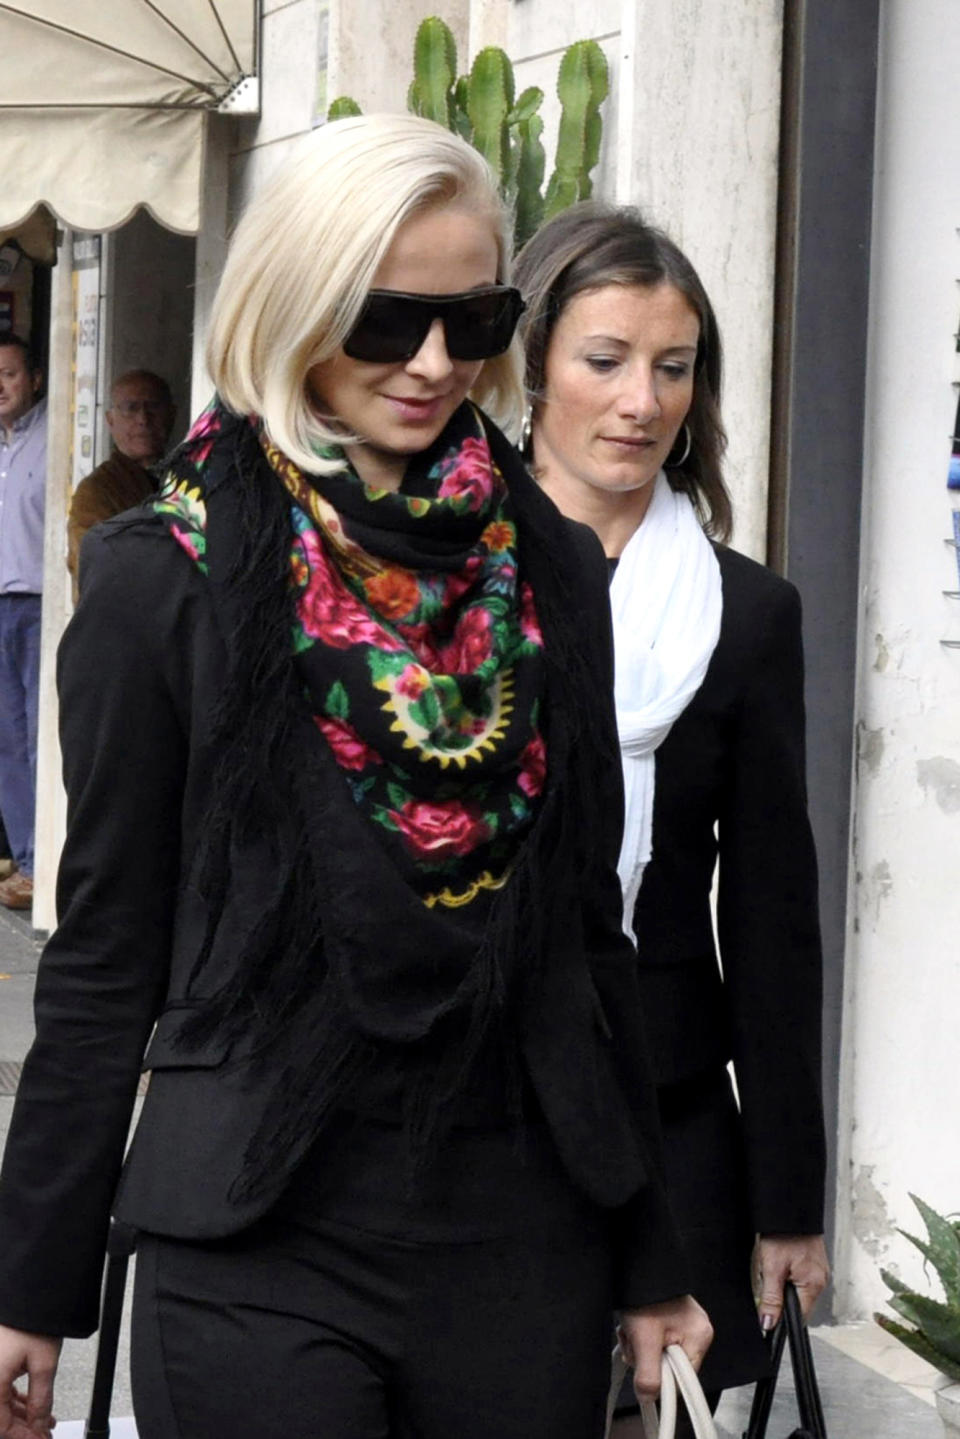 Domnica Cemortan, from Moldavia, left, arrives at the converted Teatro Moderno theater to testify in a hearing in the trial of Captain Francesco Schettino, in Grosseto, Italy, Monday, Oct. 28, 2013. The captain of the wrecked Costa Concordia is charged with manslaughter, causing the shipwreck and abandoning ship before the luxury cruise liner's 4,200 passengers and crew could be evacuated on Jan. 13, 2012 when the ship collided with a reef off the Tuscan island of Giglio, killing 32 people. (AP Photo/Giacomo Aprili)